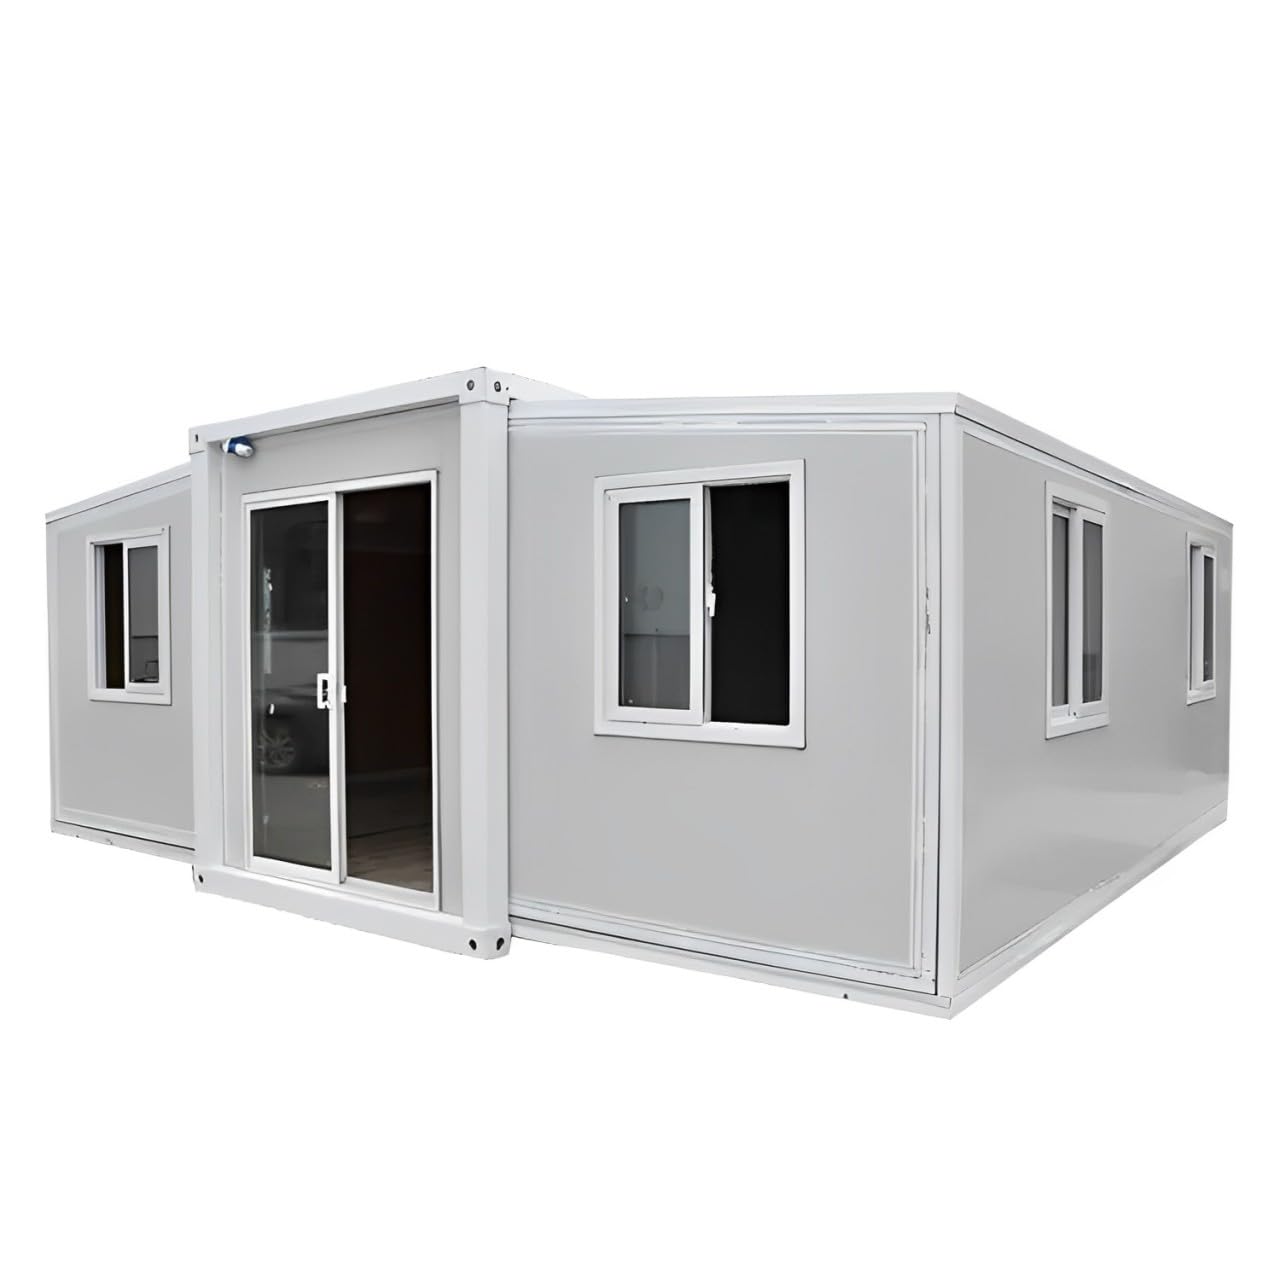 Portable Prefabricated Tiny House to Live in 19x20ft, Mobile Expandable Plastic Prefab House Including 1 Bathroom & Shower Inside for Living, Booth, Office, Guard House, Shop, Villa, Warehouse